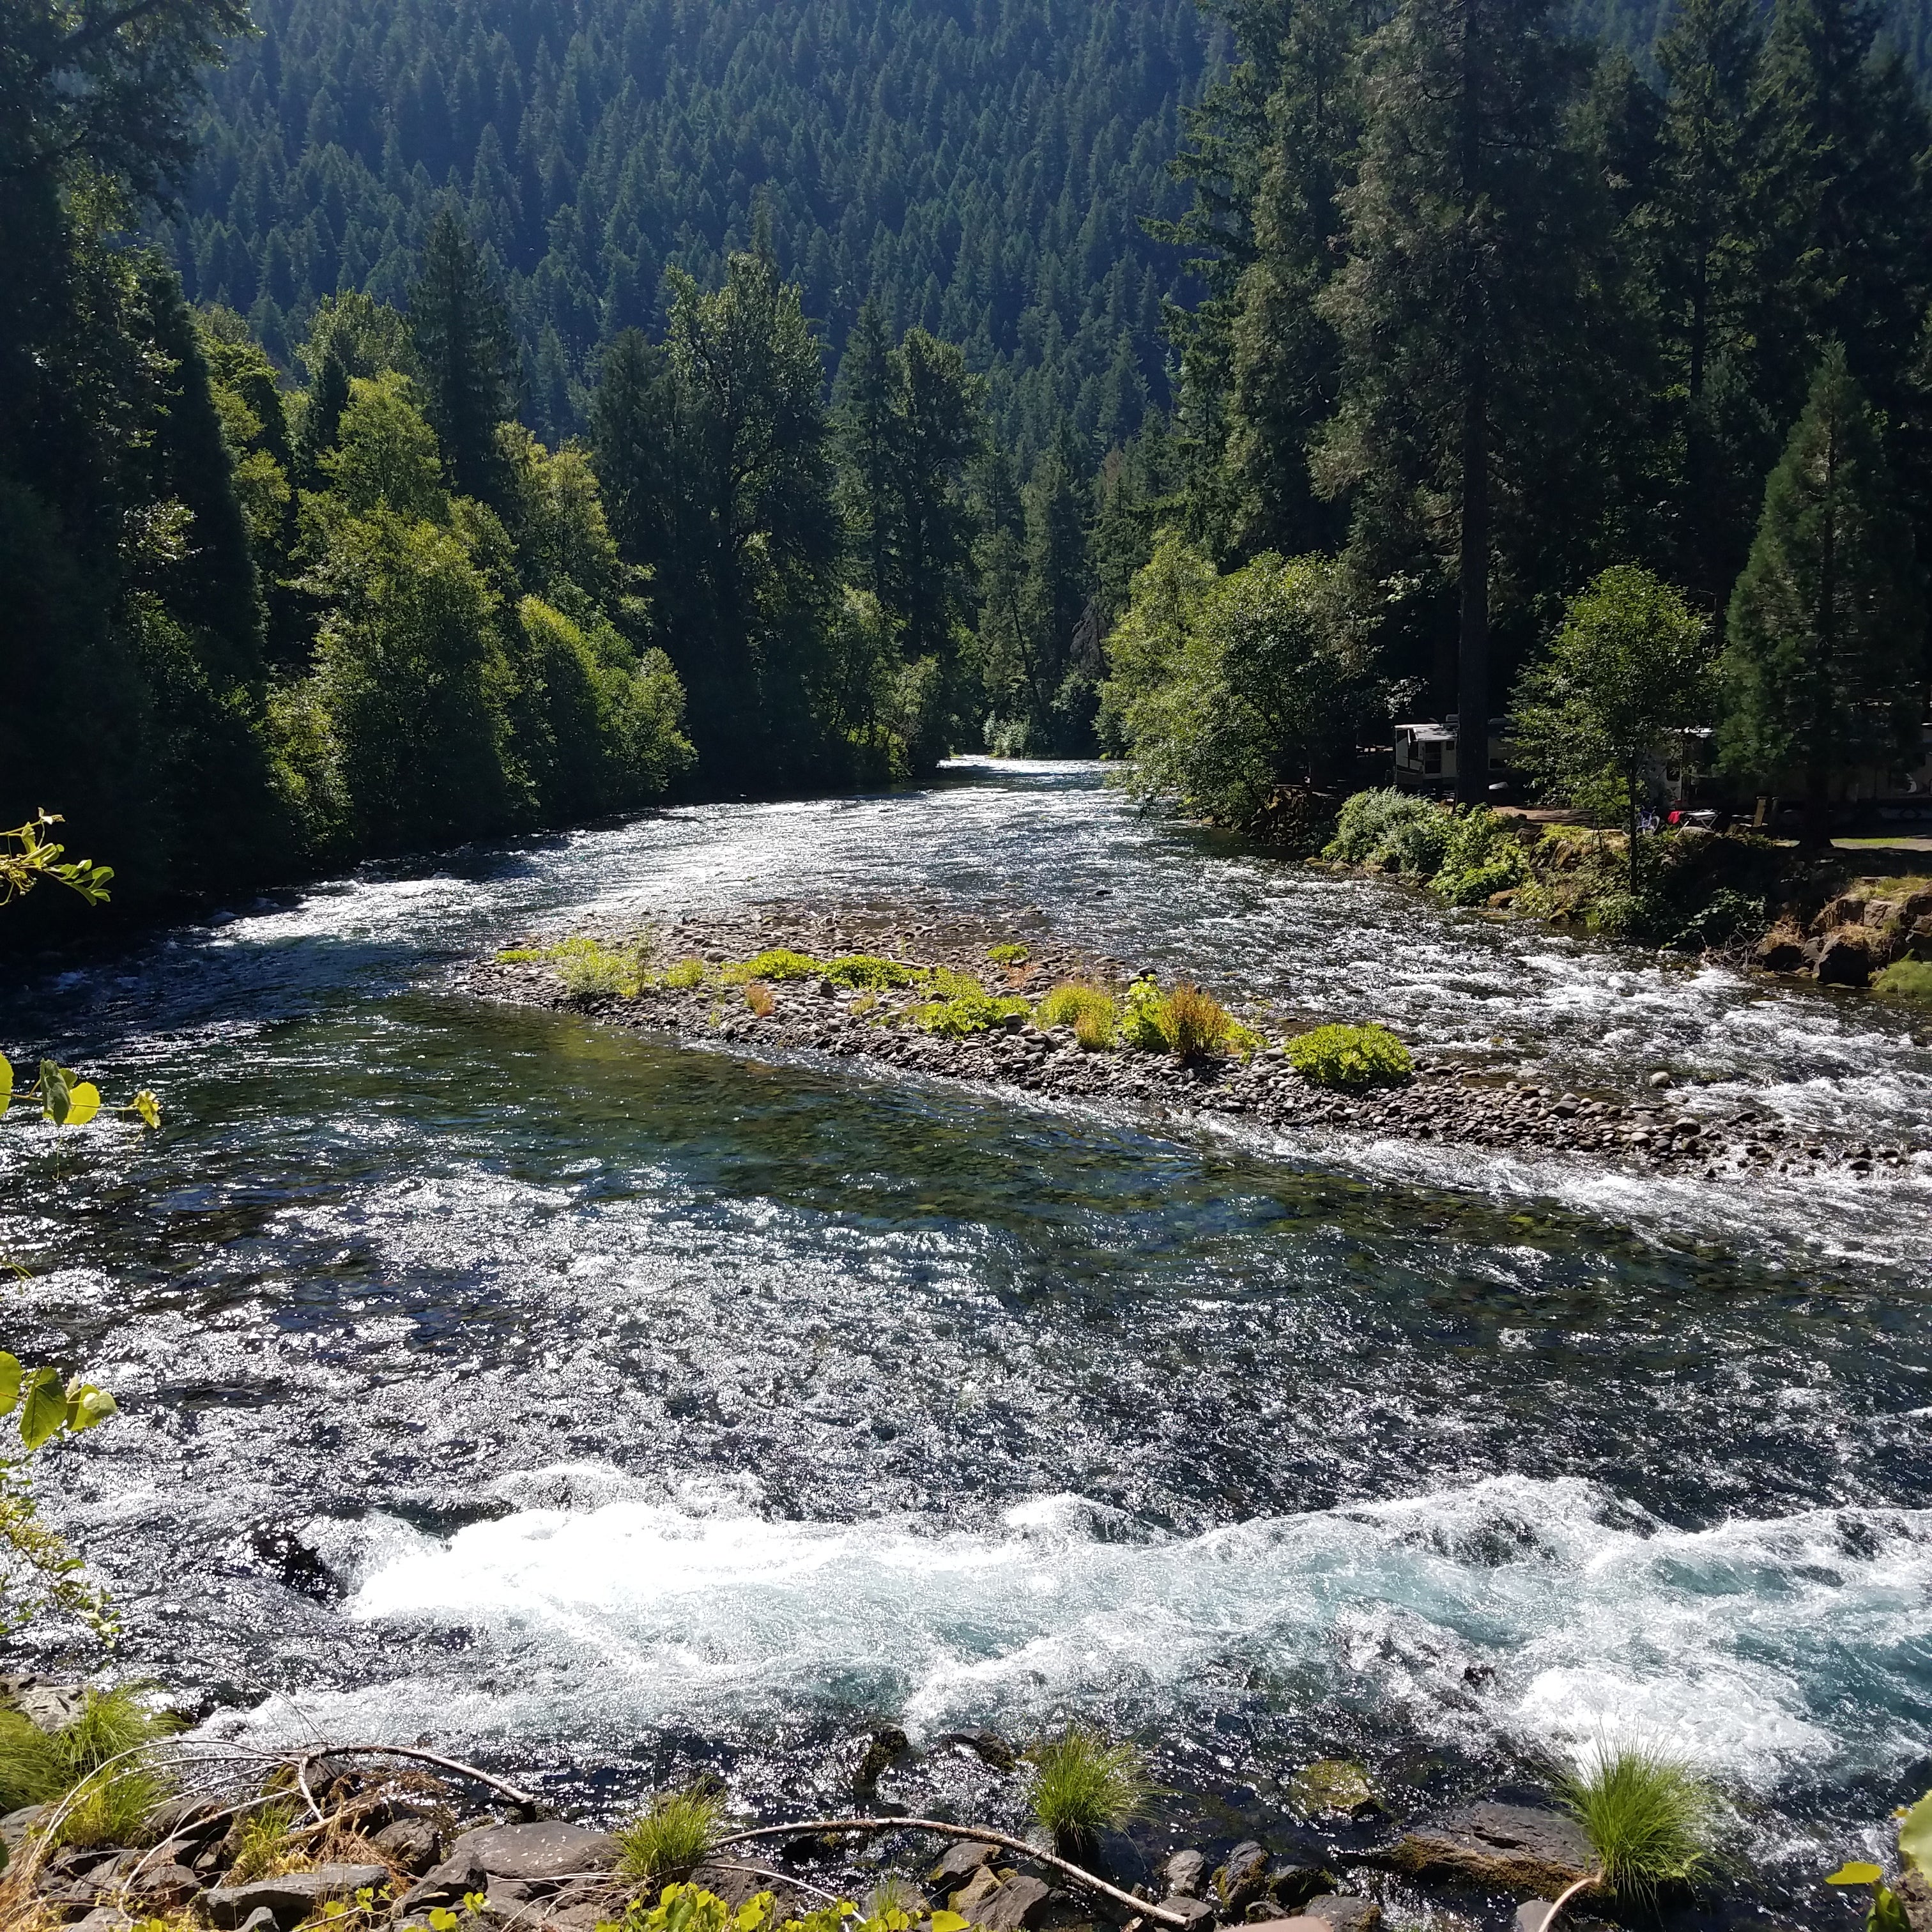 Mckenzie river.  2 steps from the bridge separating the lodge from campsites.